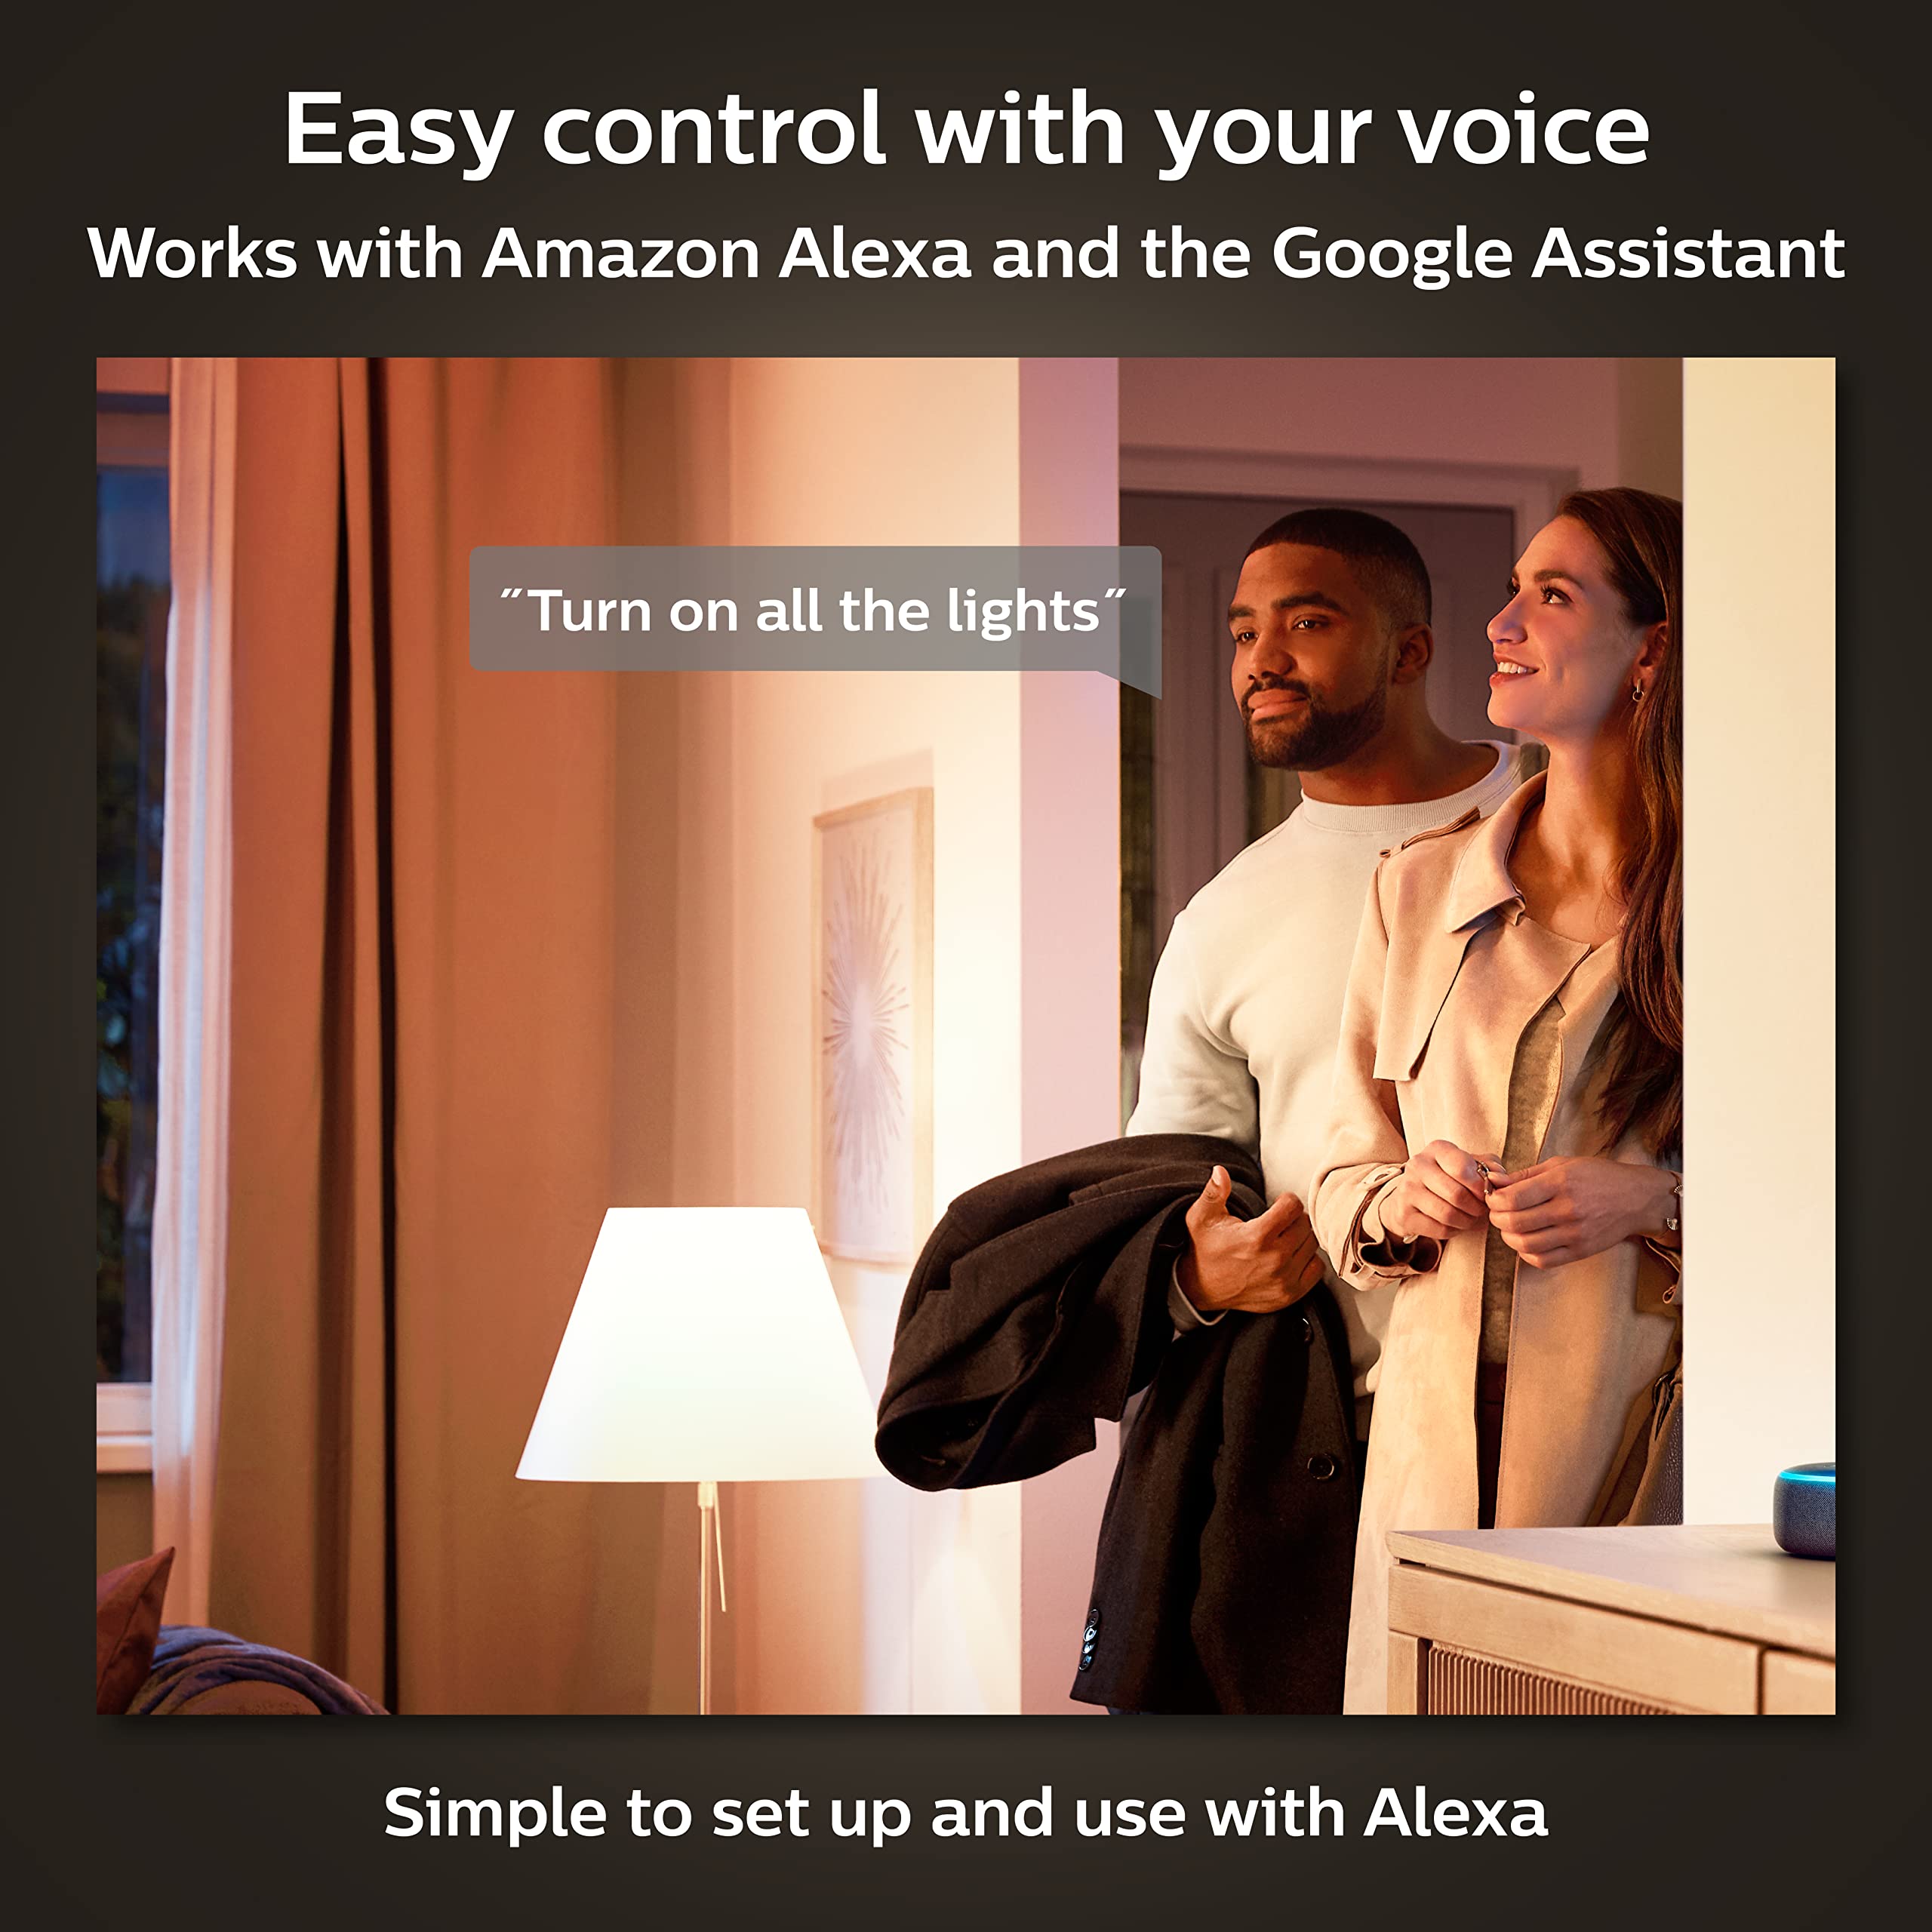 Philips Hue 2-Pack White A19 Medium Lumen Smart Bulb, 1100 Lumens, Bluetooth & Zigbee Compatible (Hue Hub Optional), Works with Alexa & Google Assistant, White (Dimmable Only),75 watts